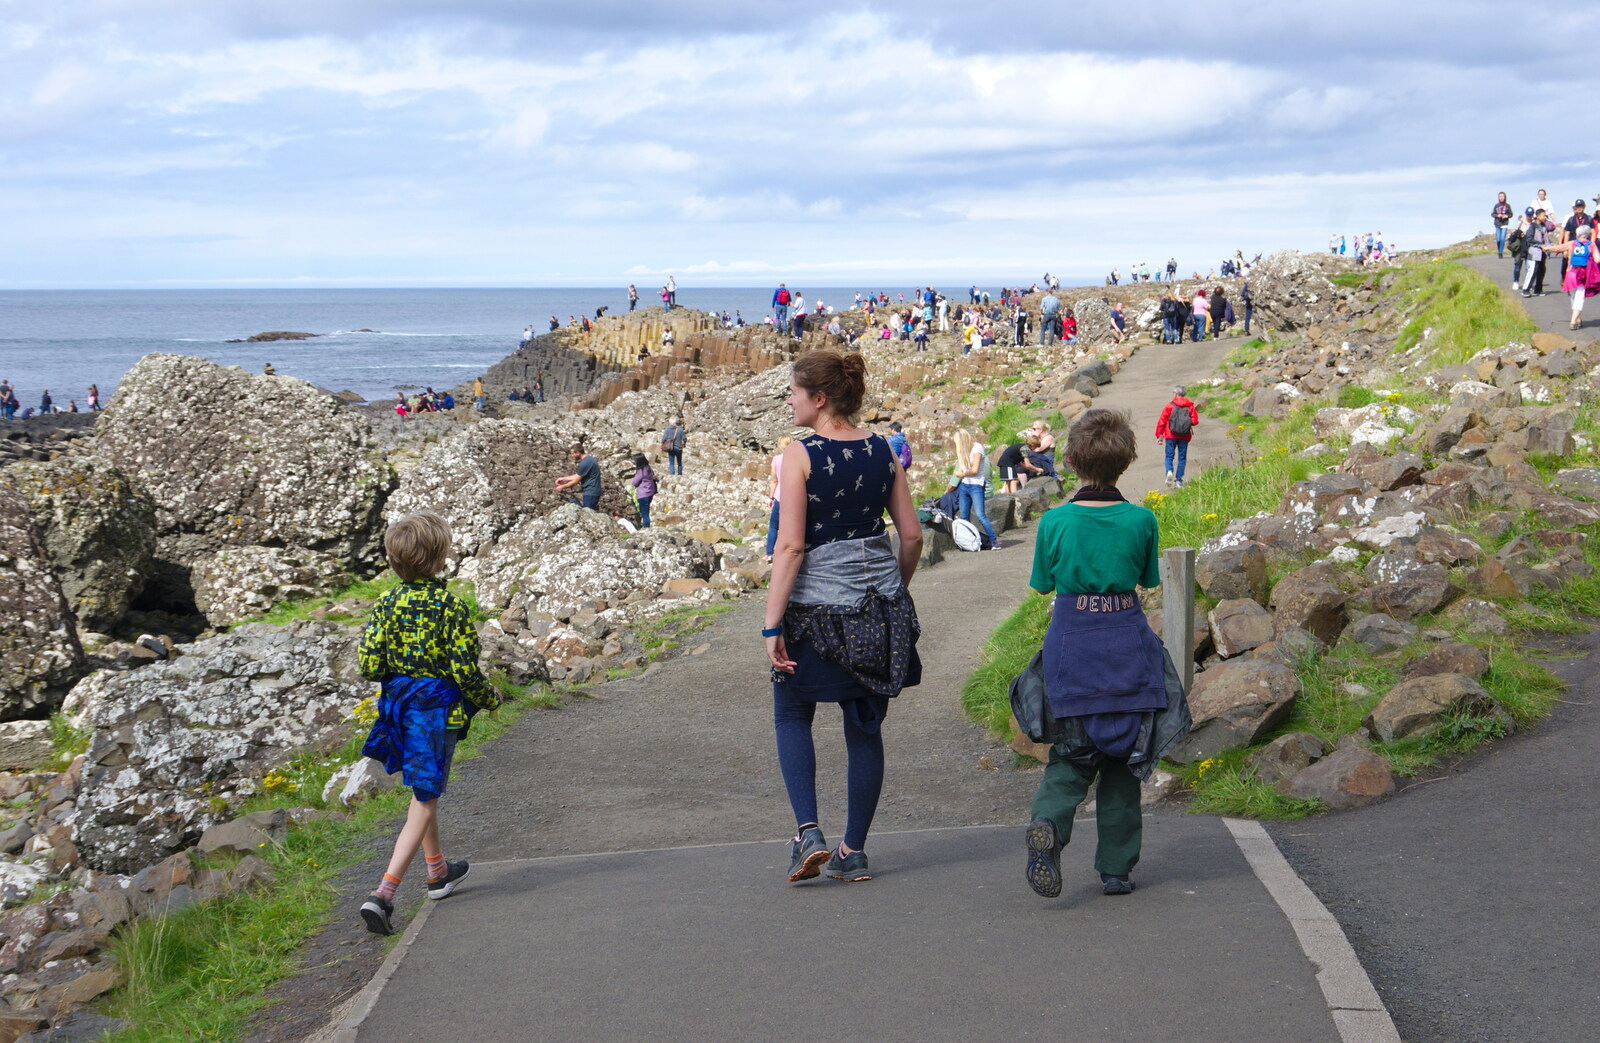 We reach the Giant's Causeway from The Giant's Causeway, Bushmills, County Antrim, Northern Ireland - 14th August 2019